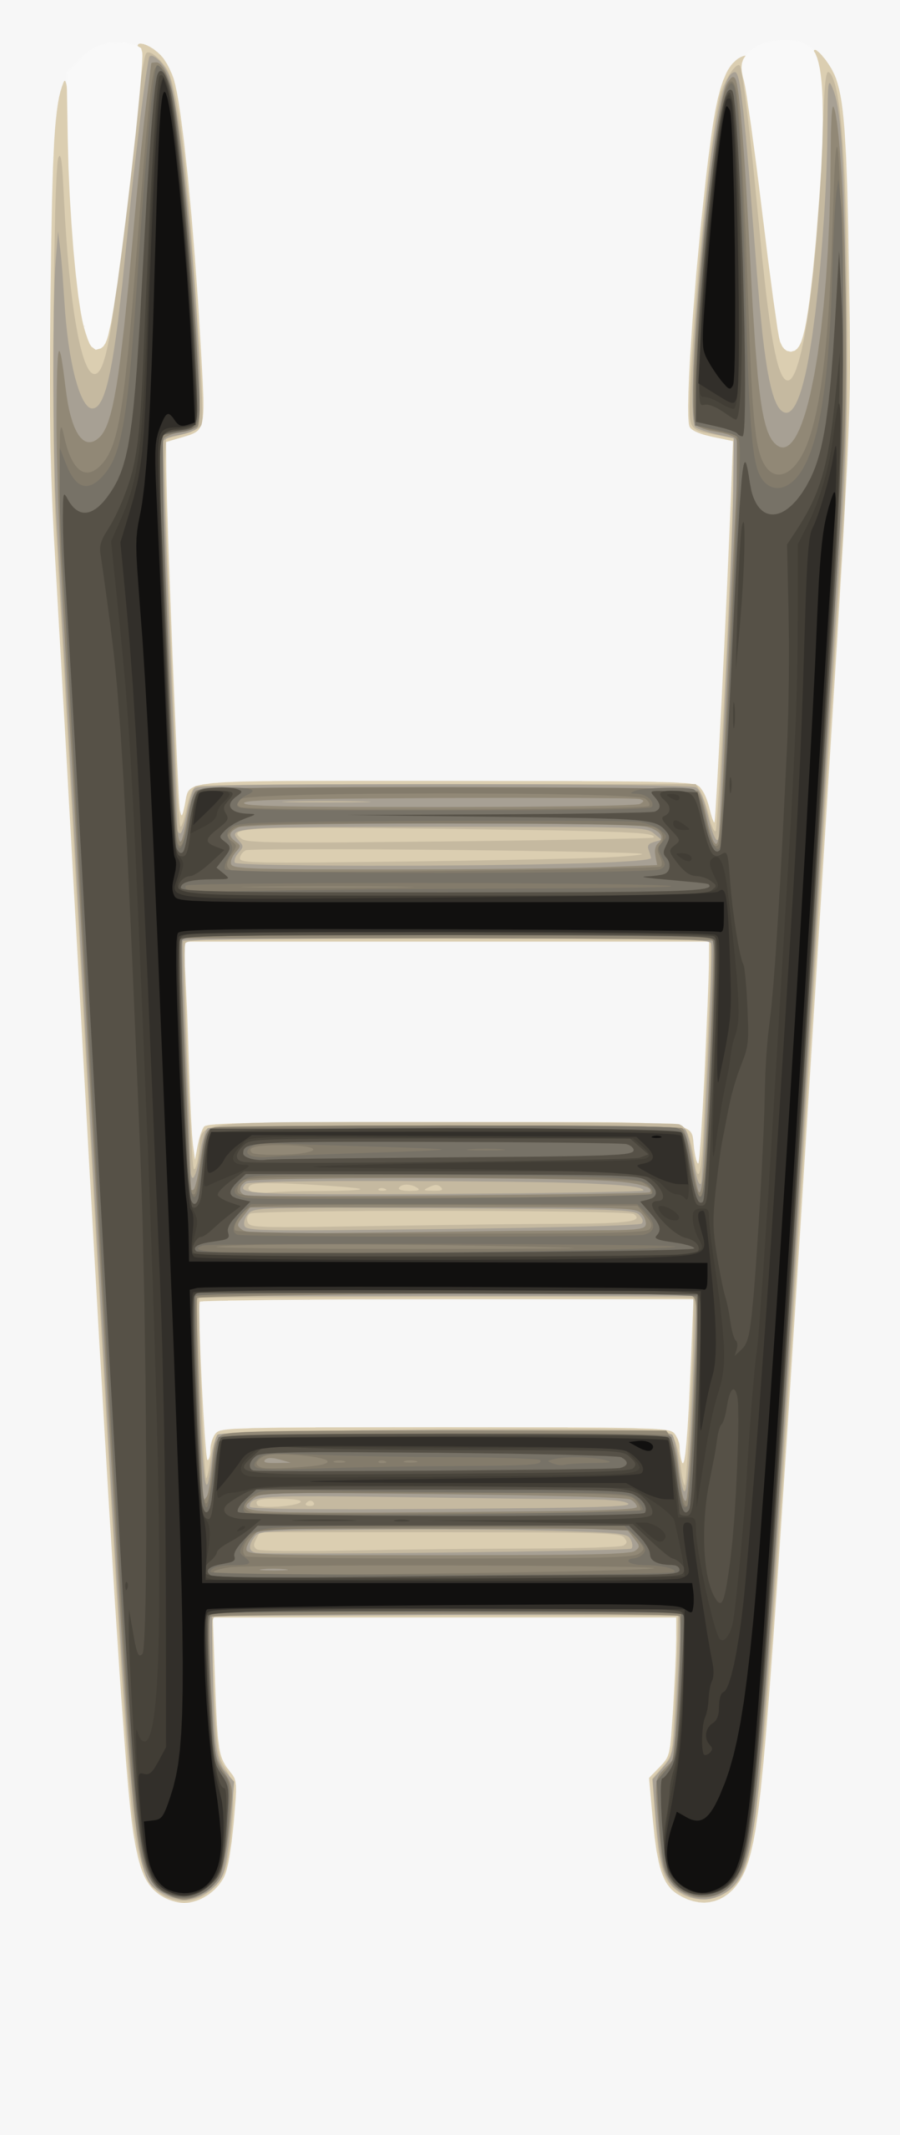 Swimming Pool Ladder Png, Transparent Clipart